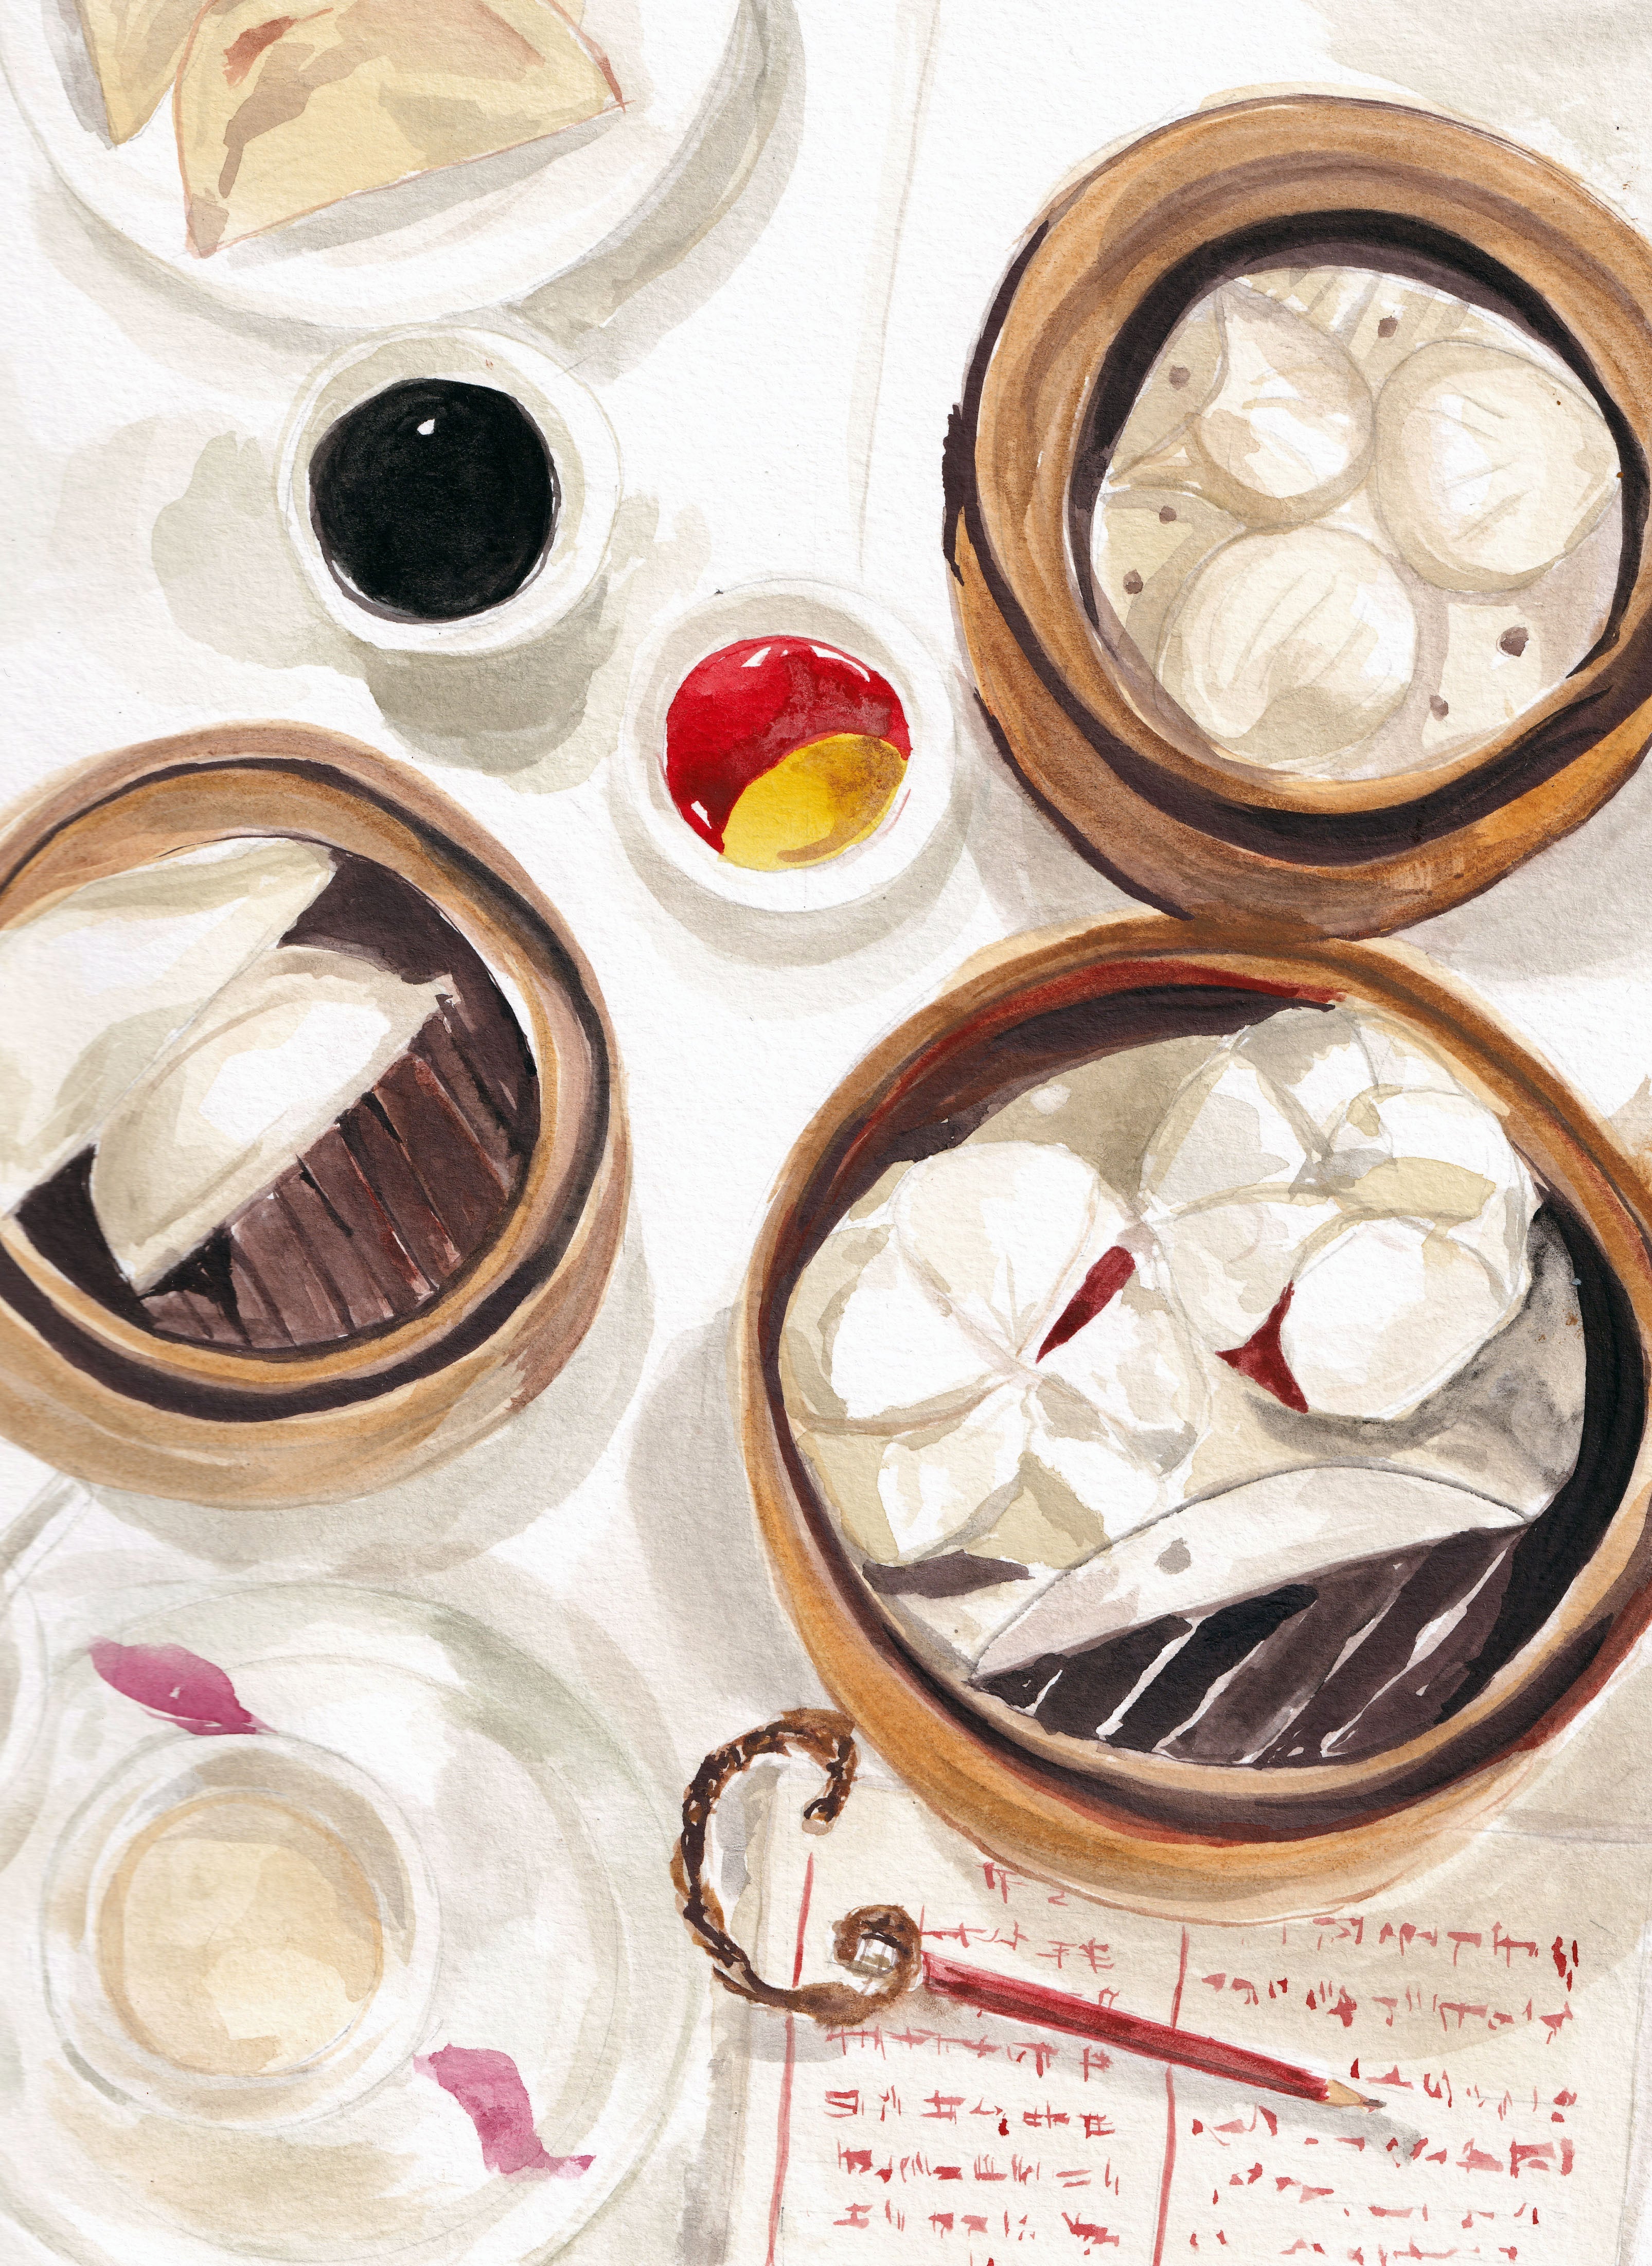 Hong Kong cuisine inspired watercolour painting. Wall art print for your home.